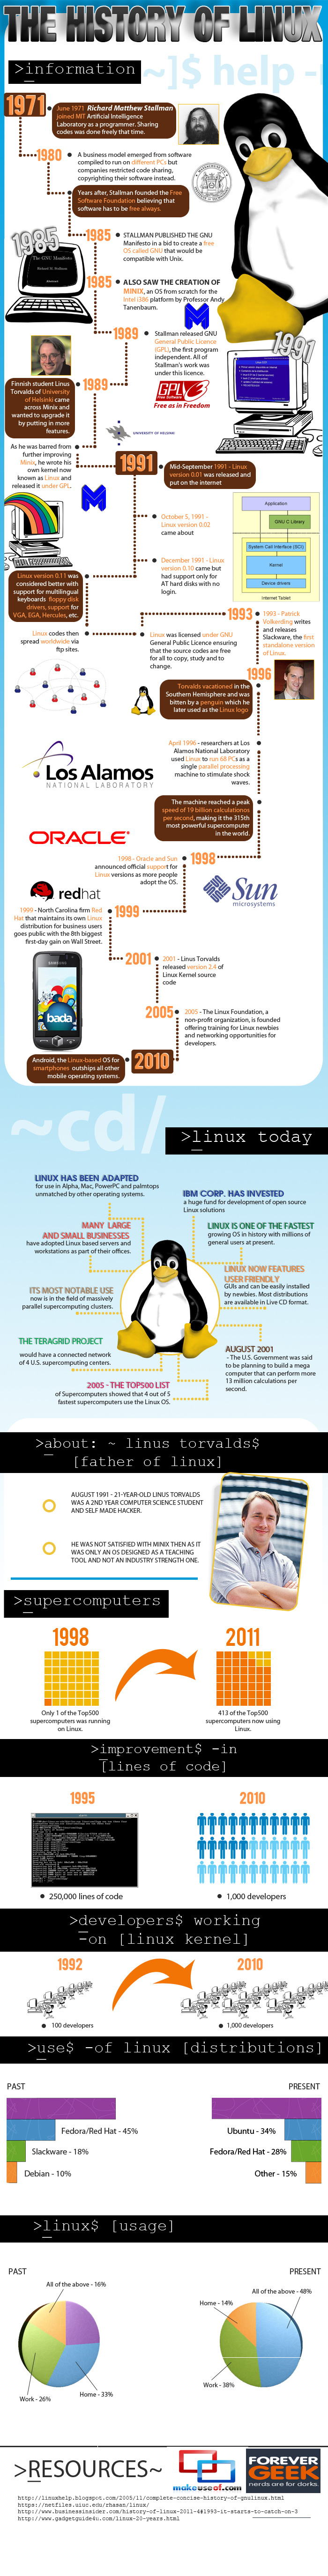 The History Of Linux